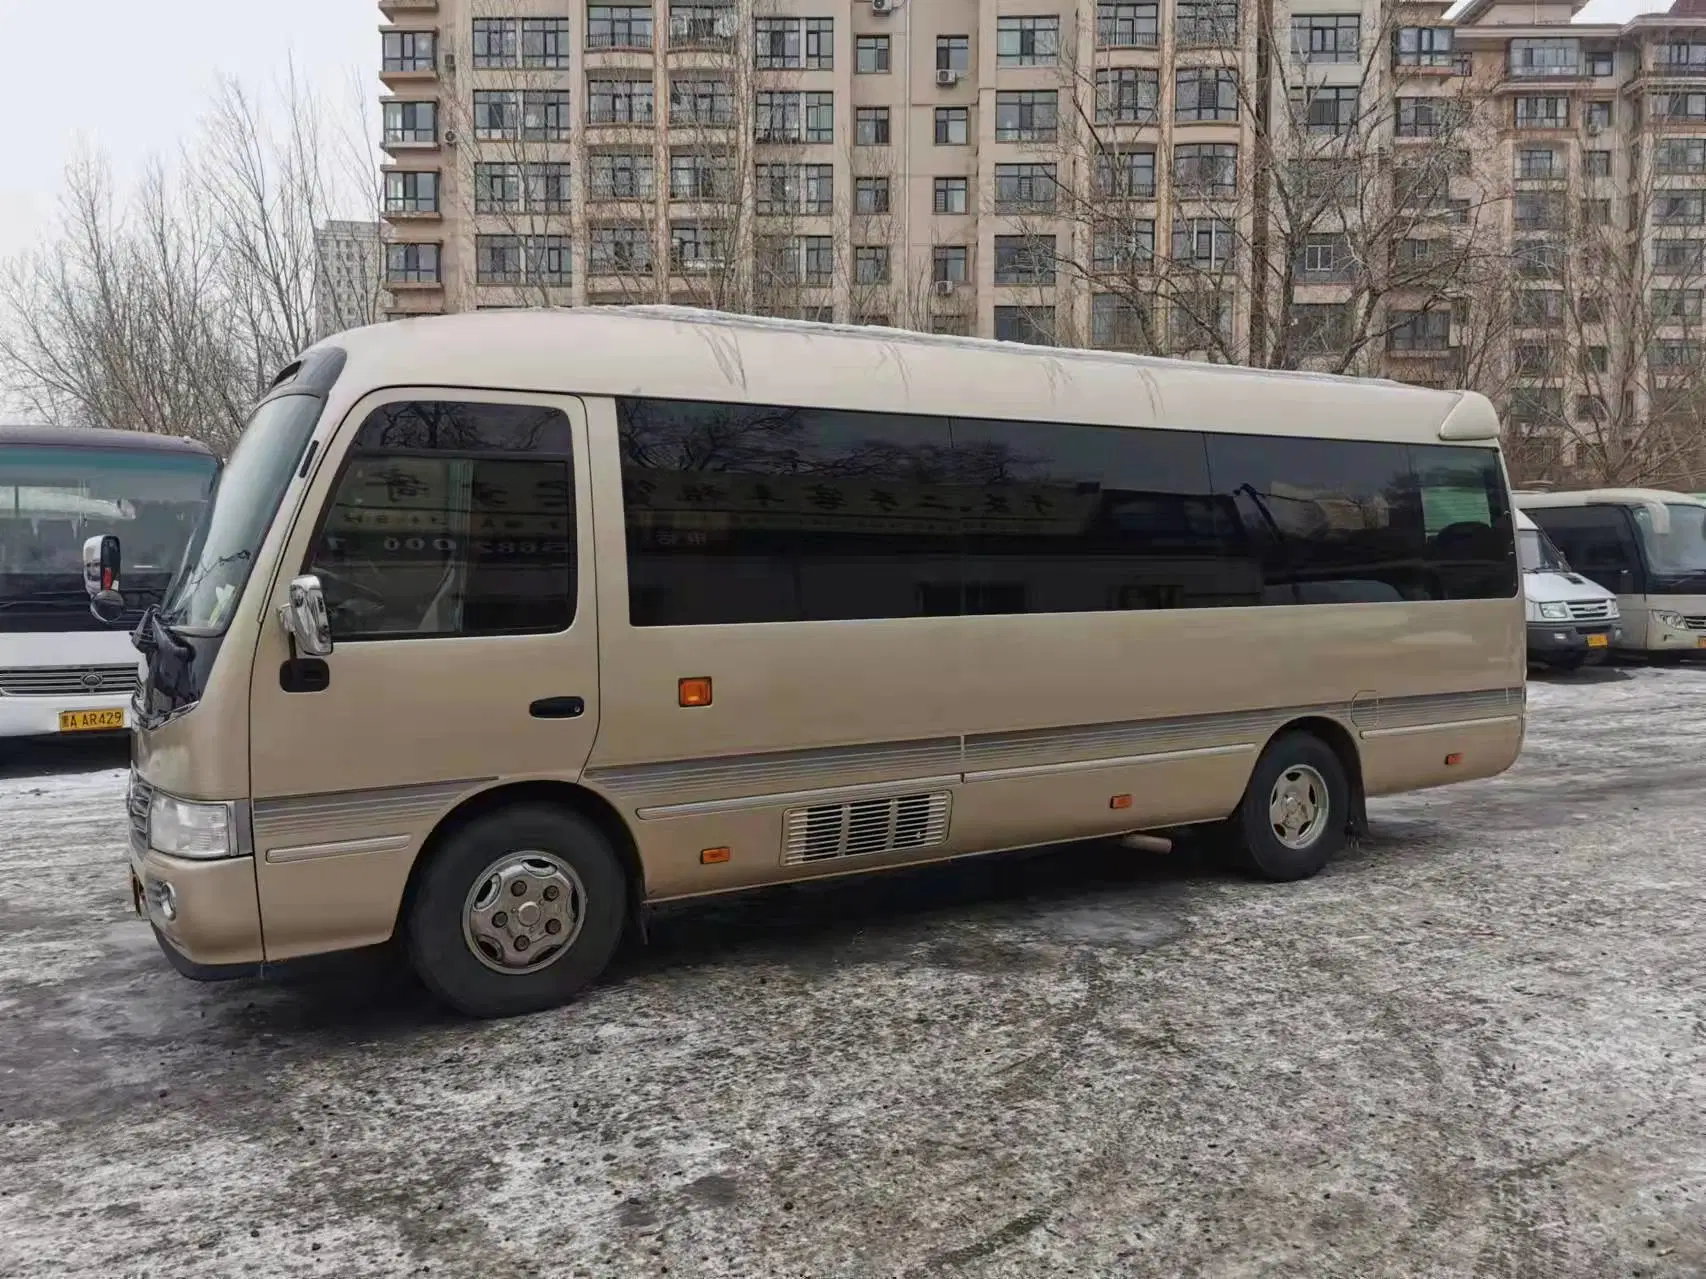 Used Toyota Coaster Bus Middle City Vehicle Secondhand Original 30 Seats Shuttle Bus